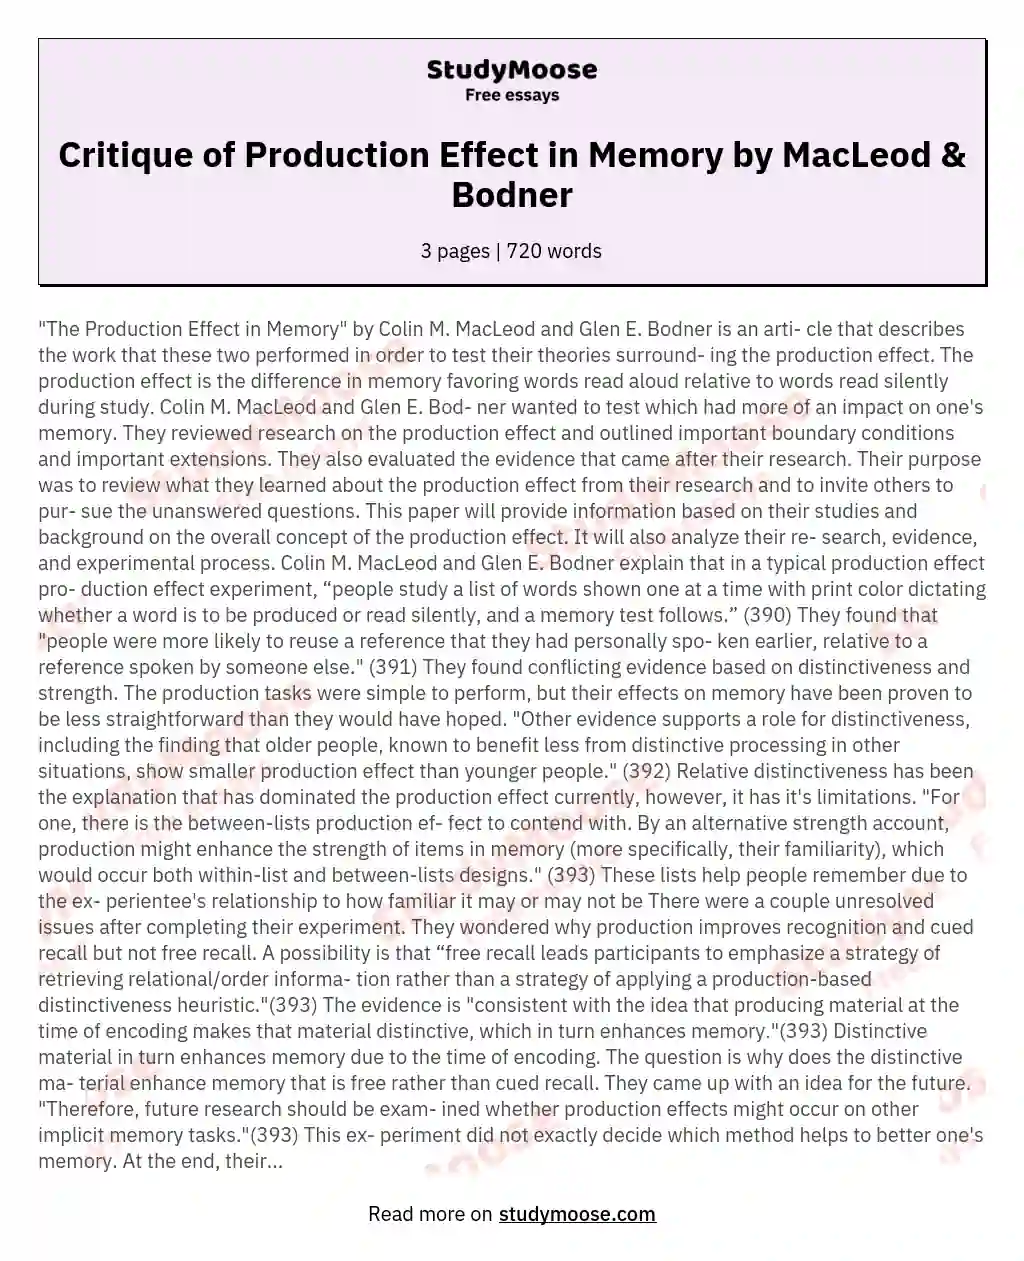 Critique of Production Effect in Memory by MacLeod & Bodner essay